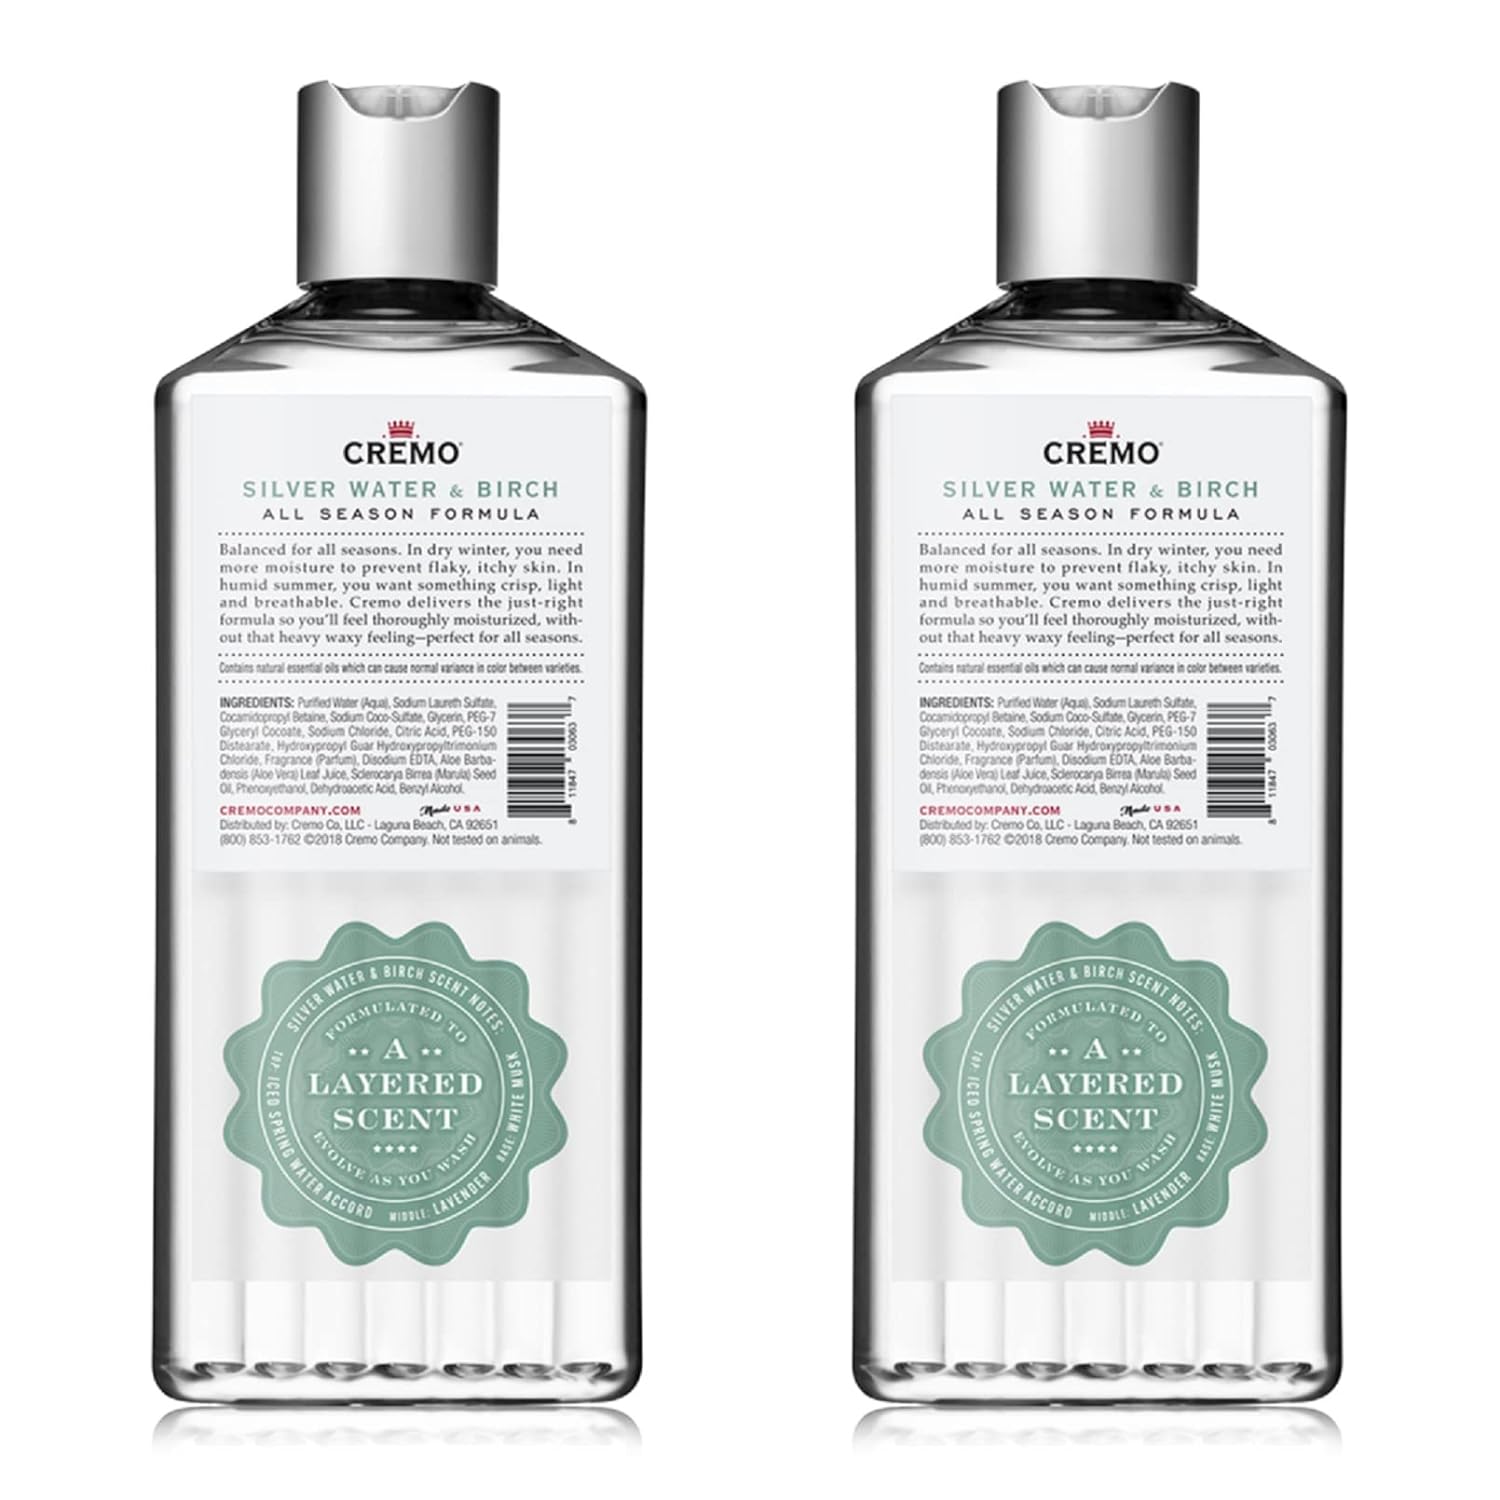 Cremo Rich-Lathering Silver Water & Birch Body Wash, A Revitalizing Combination of Glacier-Fed Streams and White Birch 16 Fl Oz (2-Pack) : Beauty & Personal Care